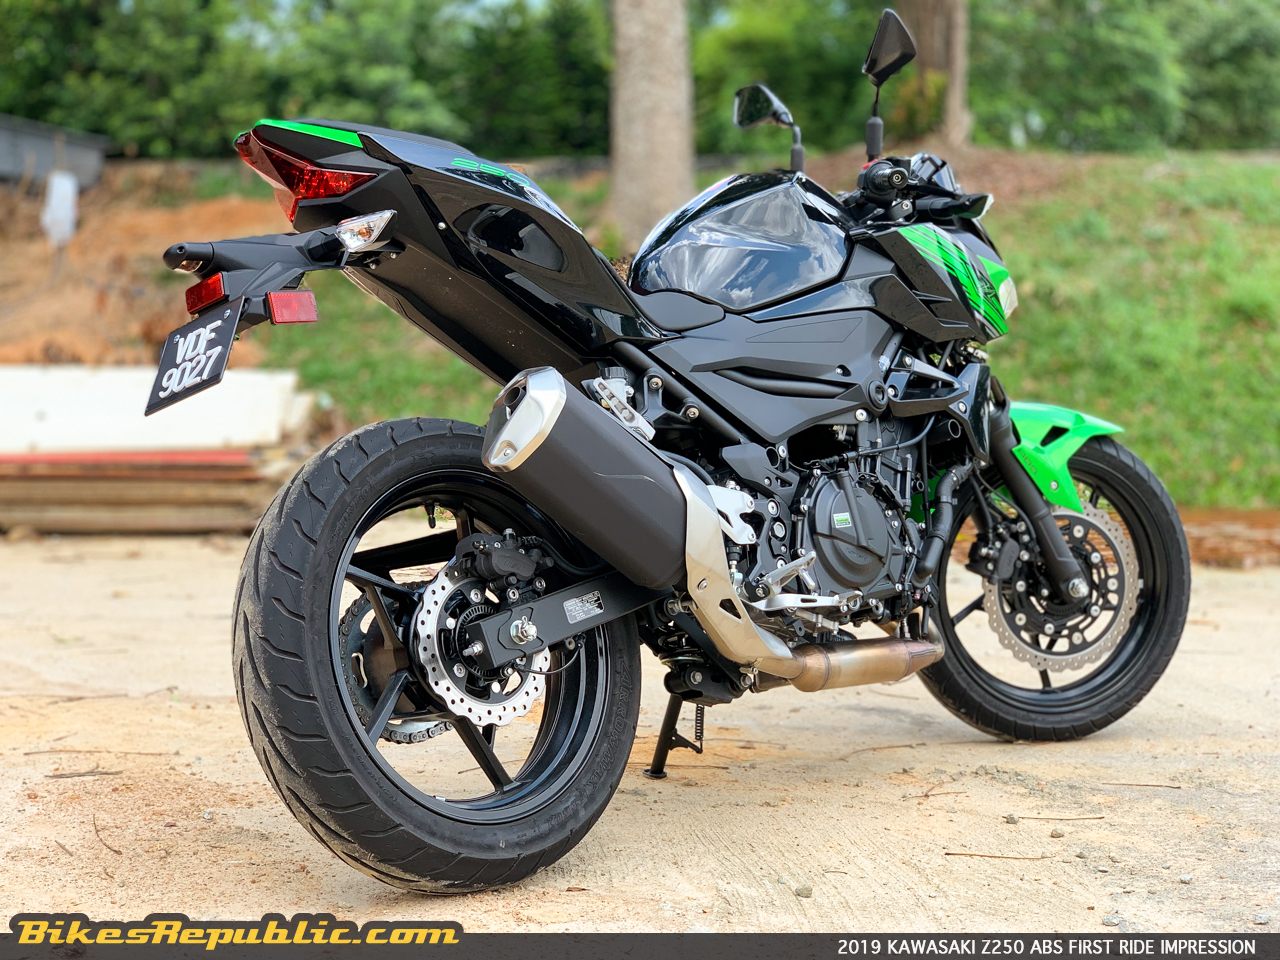 2019 Z250 ABS First Ride Review - Motorcycle news, Motorcycle reviews from Malaysia, Asia and the world - BikesRepublic.com